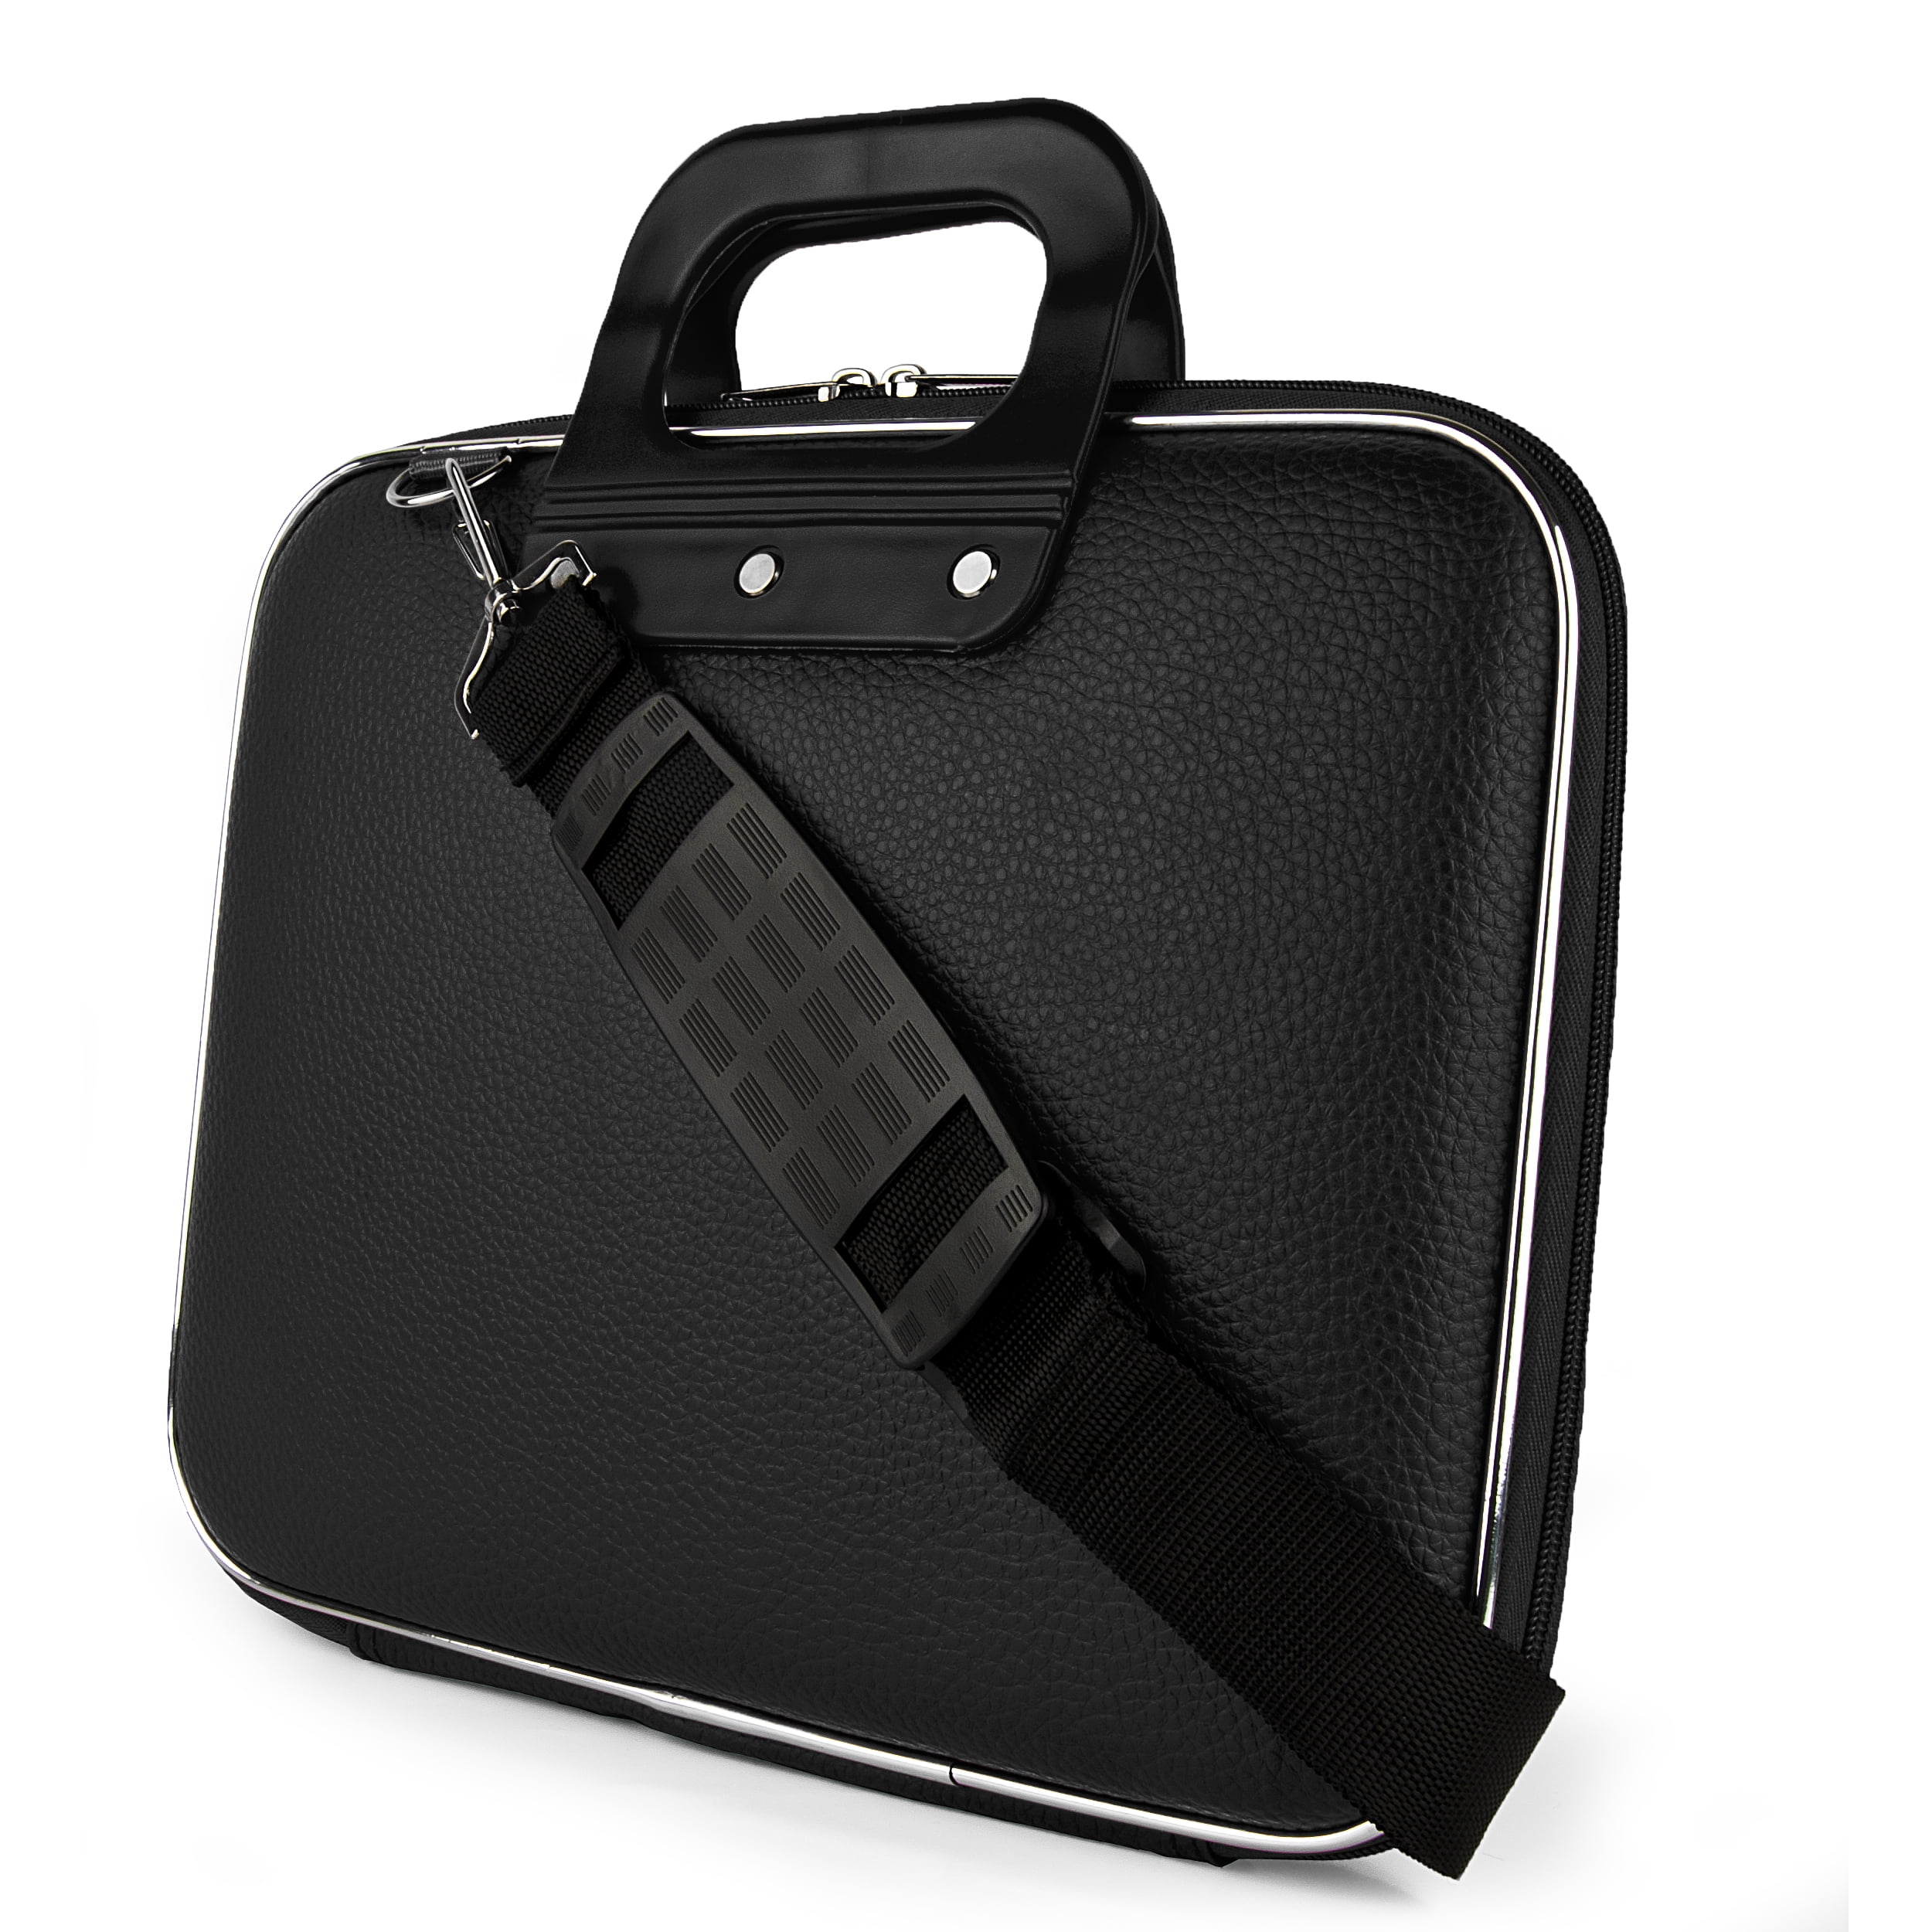 Professional Business Messenger Bag Office Travel 12 inch Laptop Briefcase 